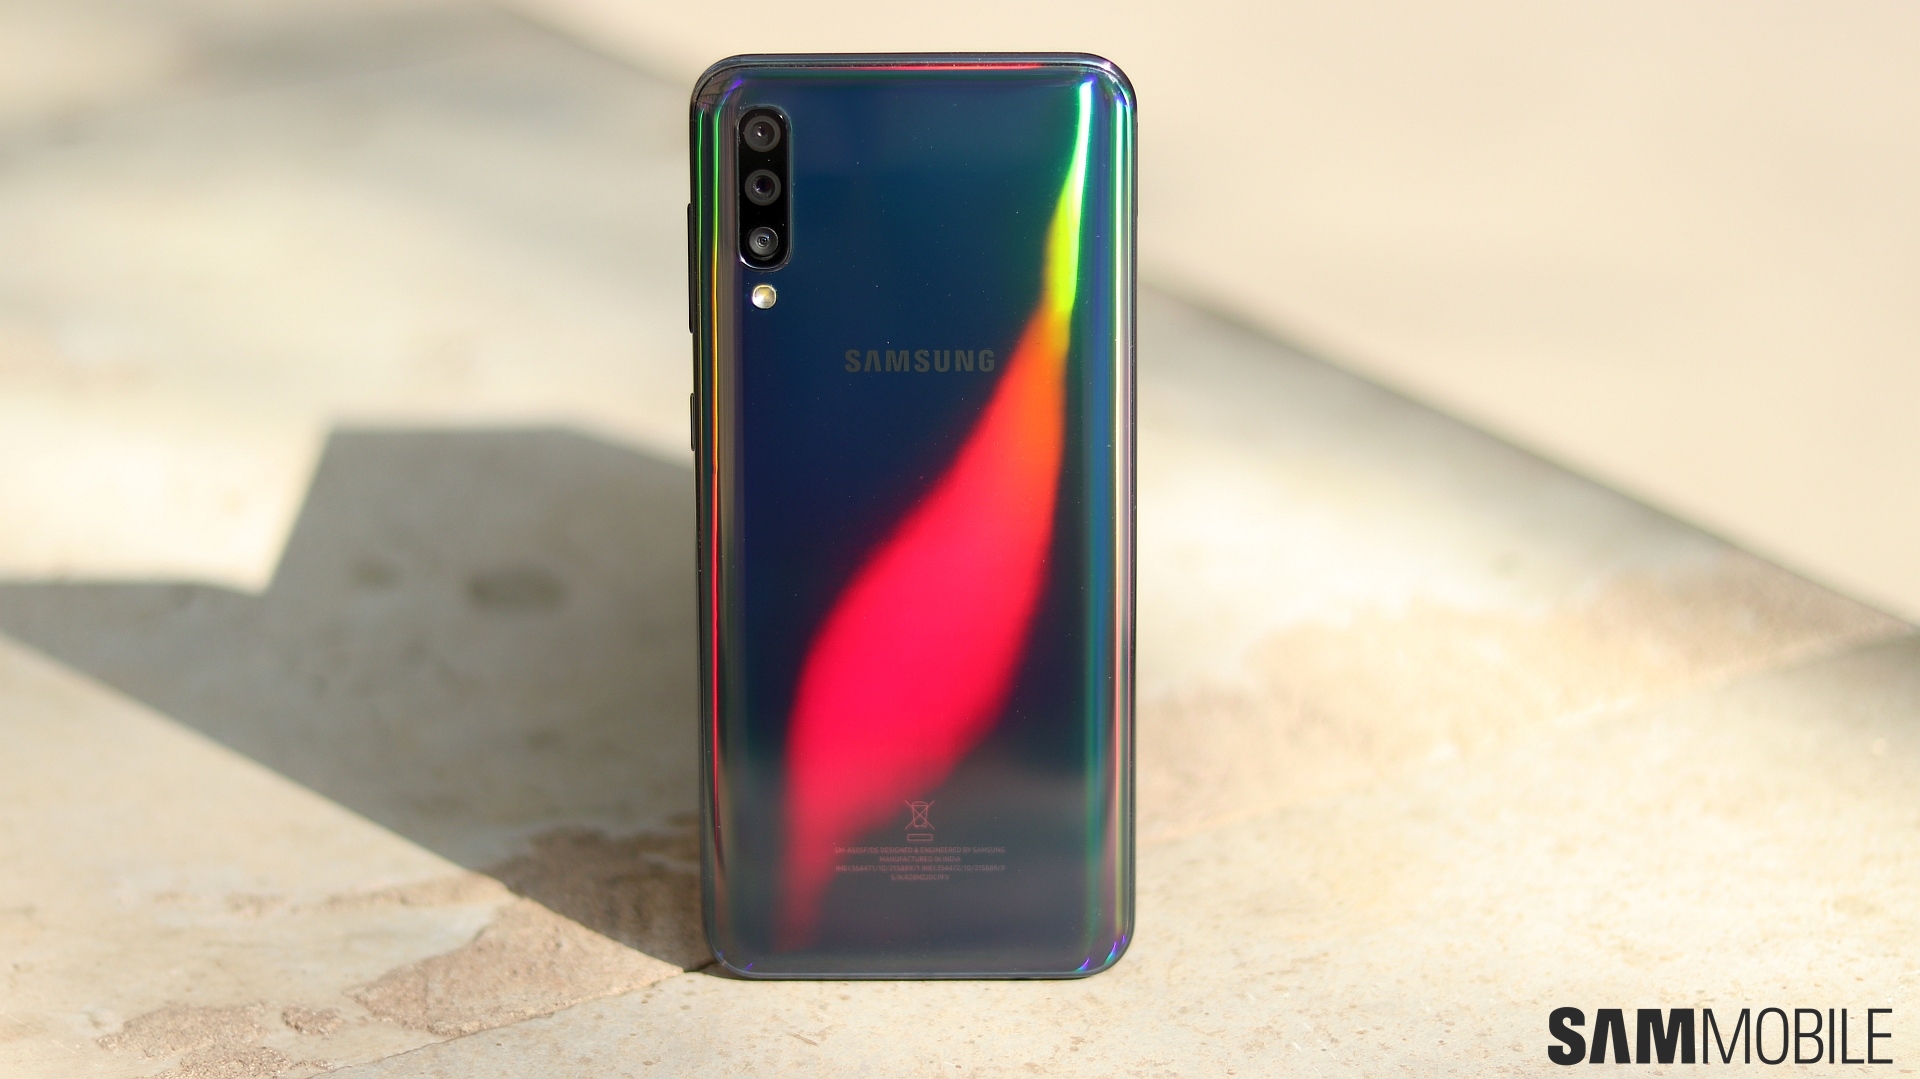 Galaxy A50 gets December 2021 security update in various markets - SamMobile